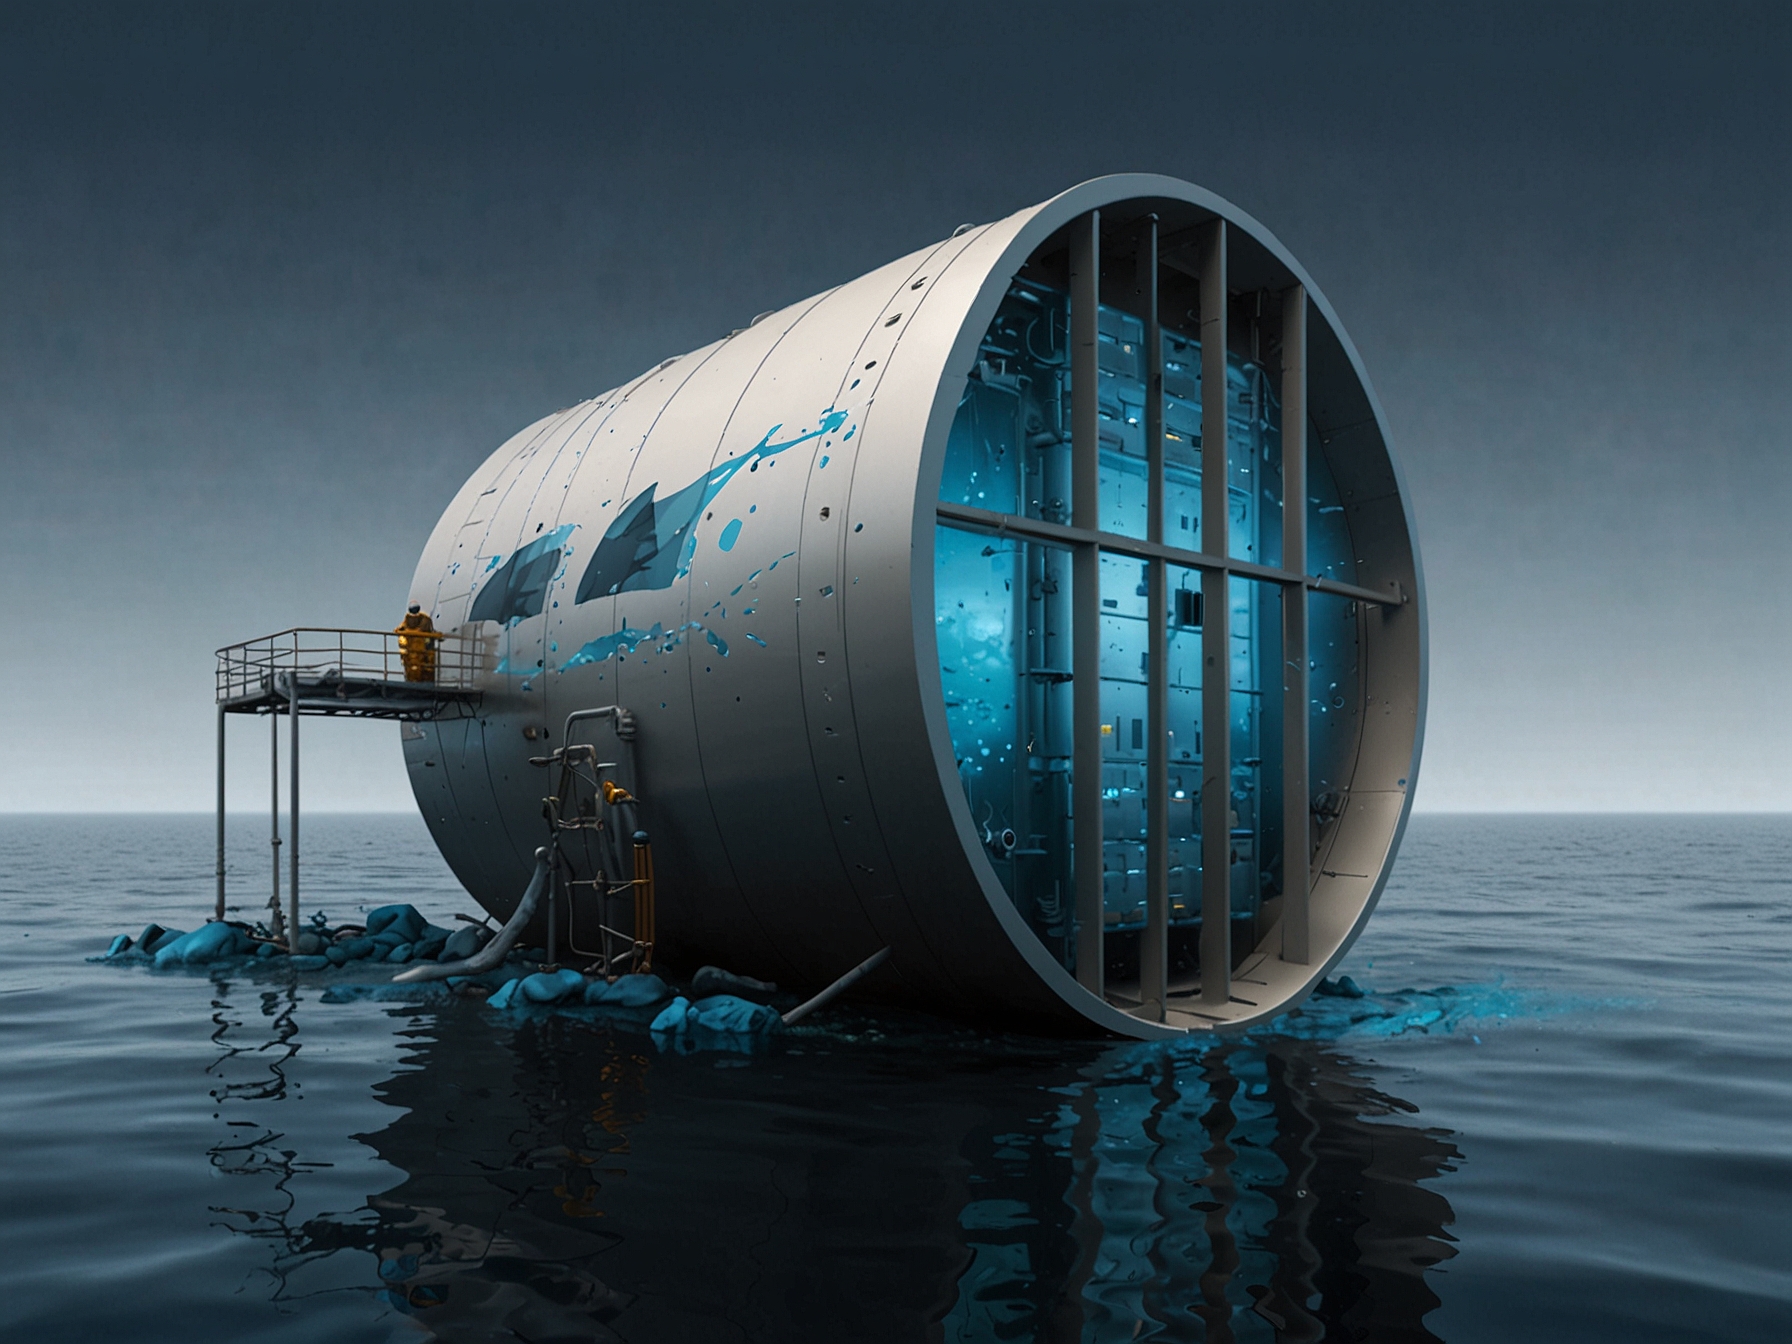 An illustration depicting Microsoft's underwater data center, a 40-foot cylindrical pod, submerged off the Orkney Islands, highlighting sustainable and eco-friendly data center technology.